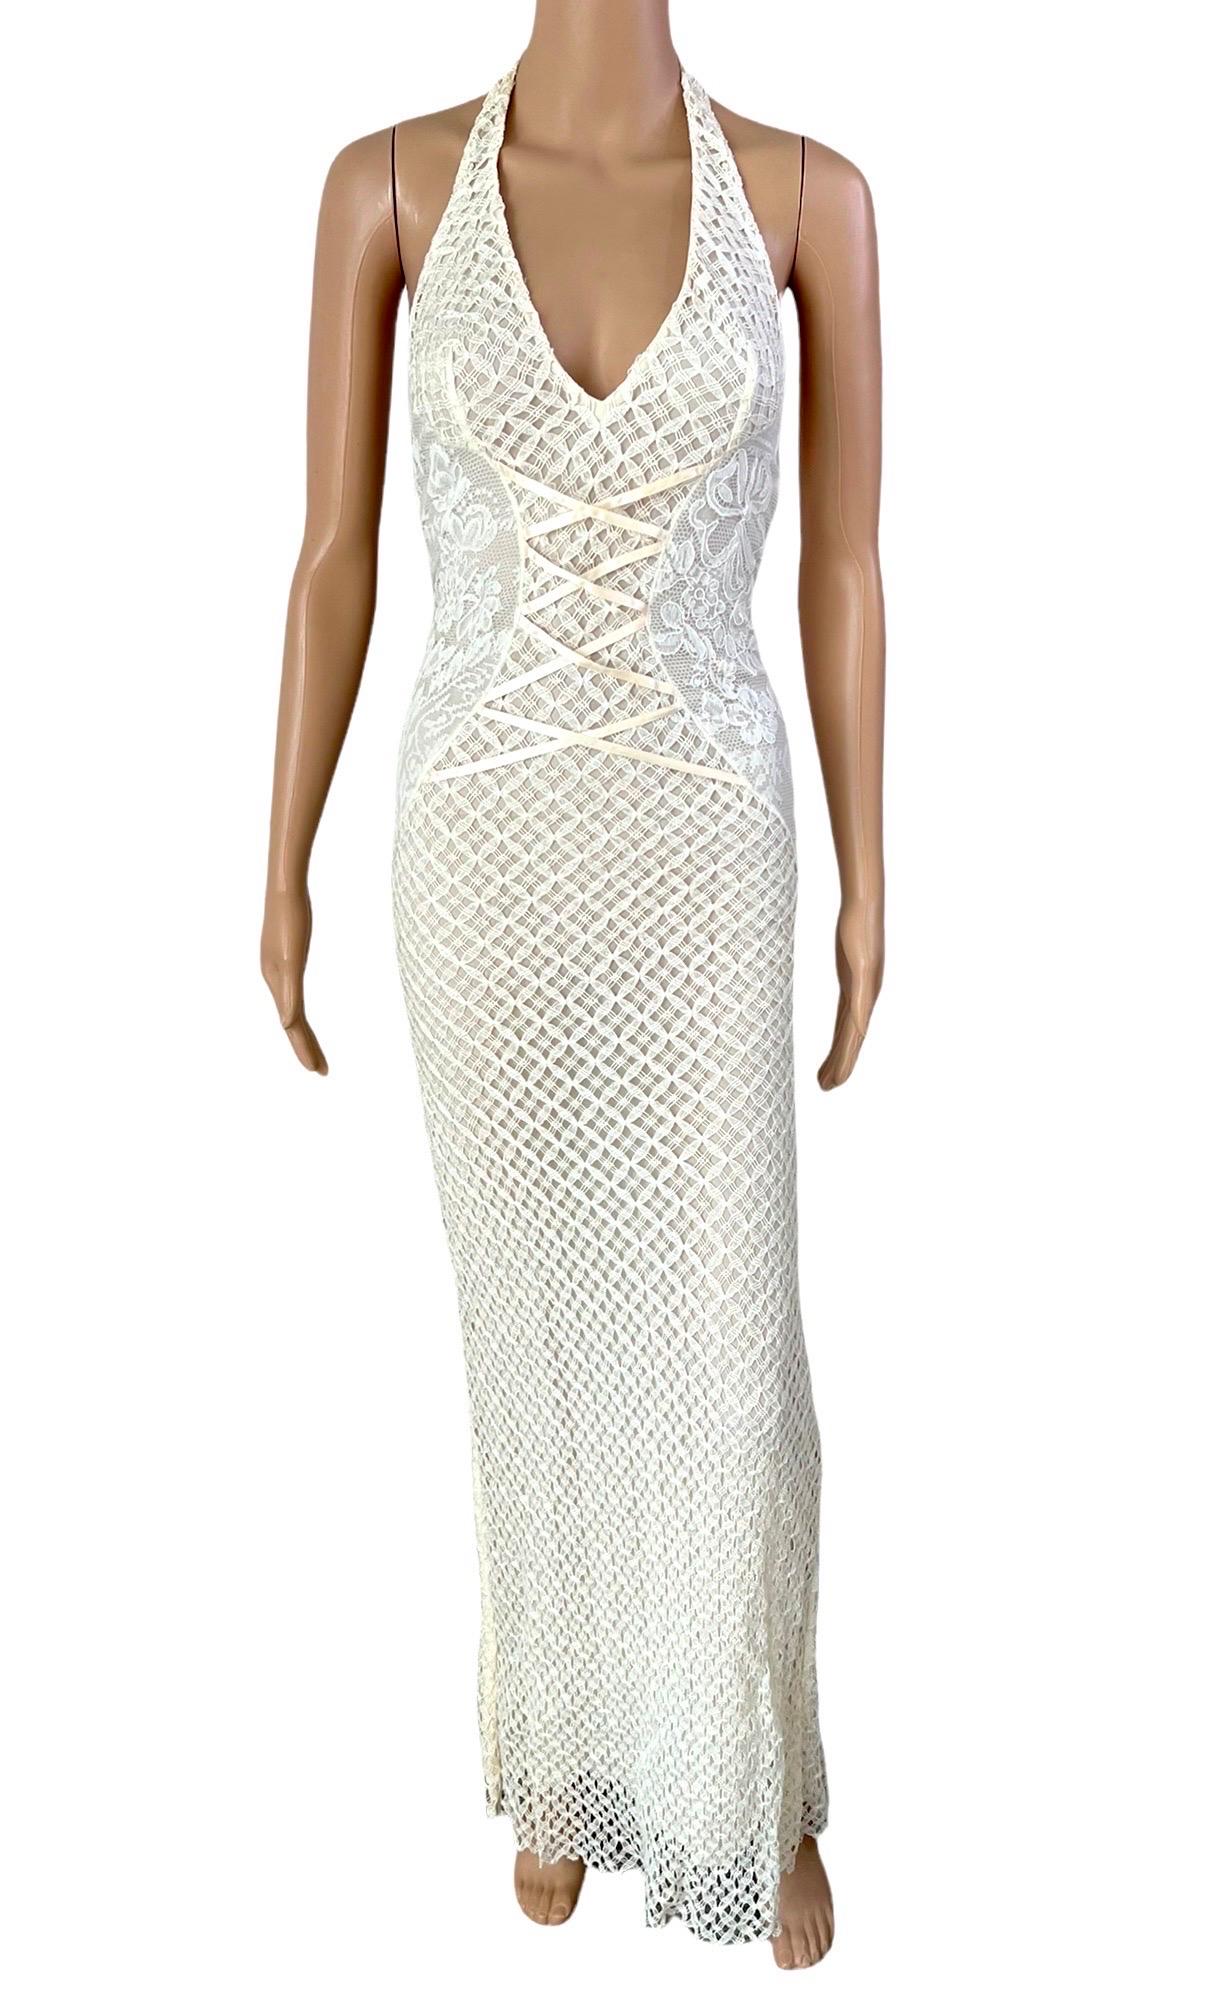 Gianni Versace S/S 2002 Plunging Backless Semi Sheer Lace Knit Ivory Dress Gown In Good Condition In Naples, FL